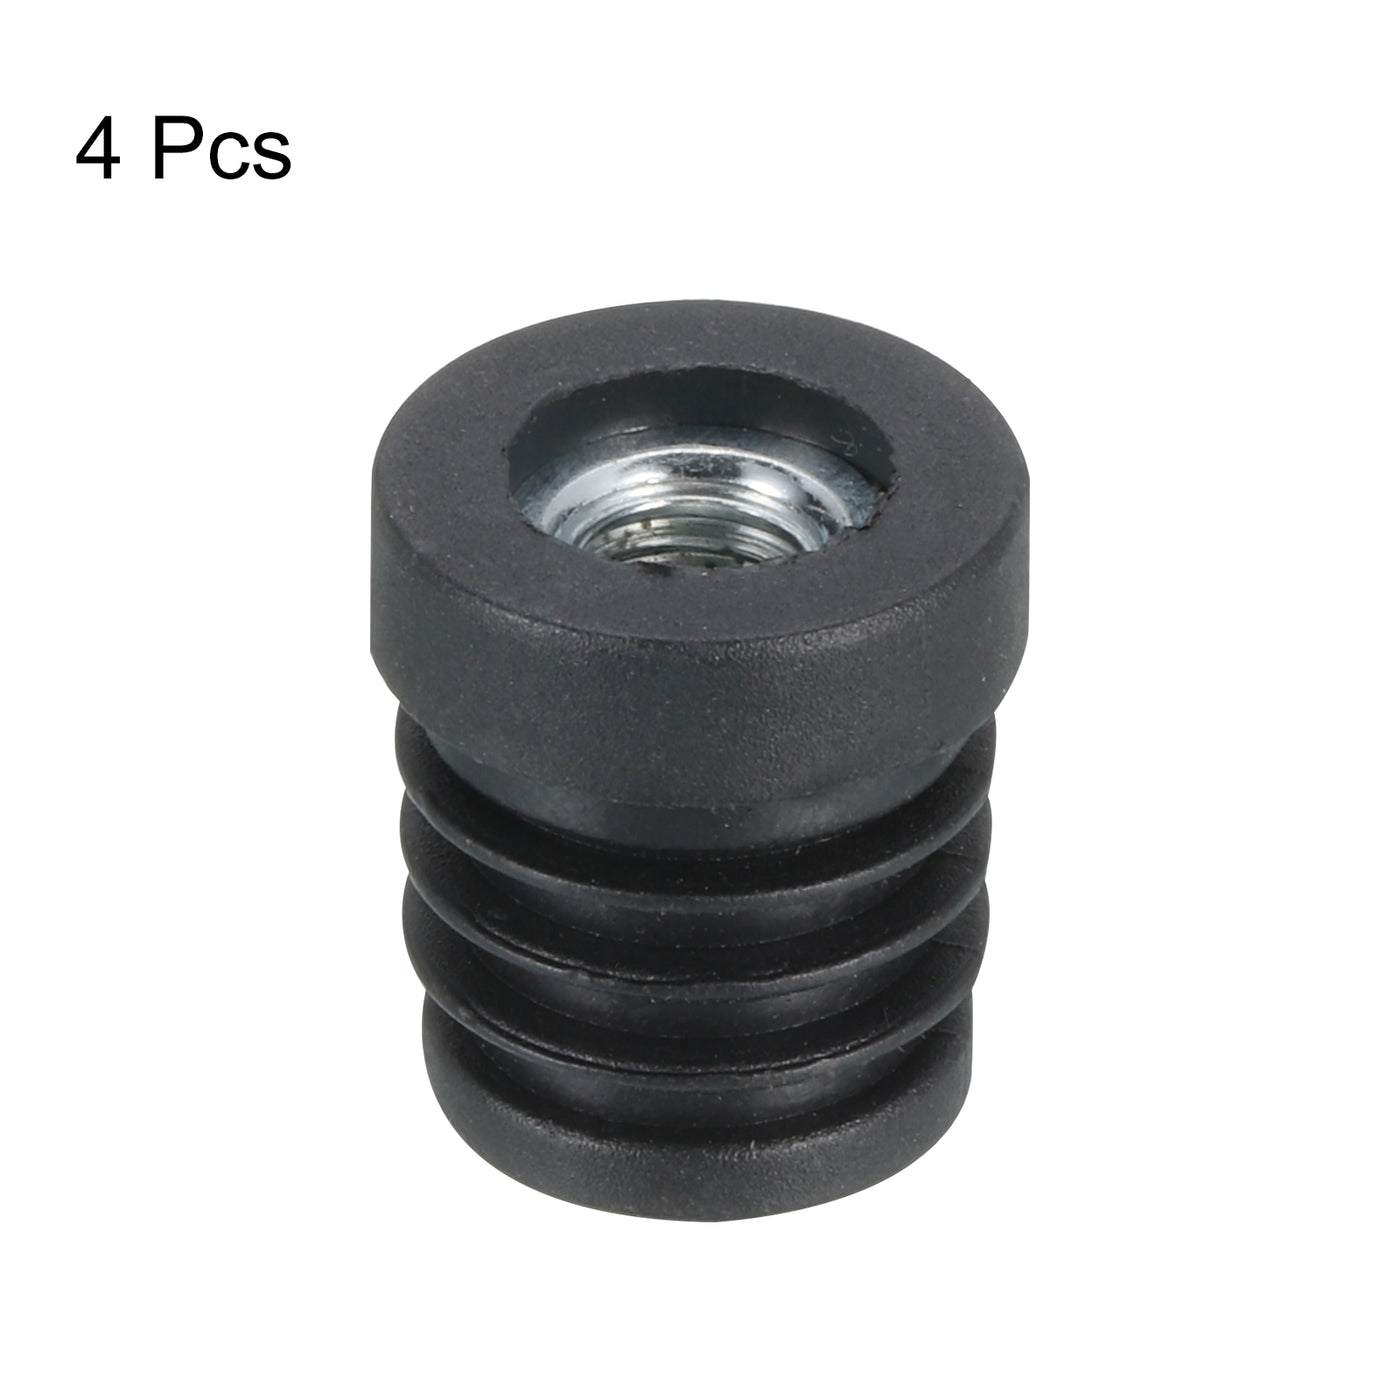 uxcell Uxcell 4Pcs Caster Insert with Thread, 19mm/0.75" M8 Thread for Furniture